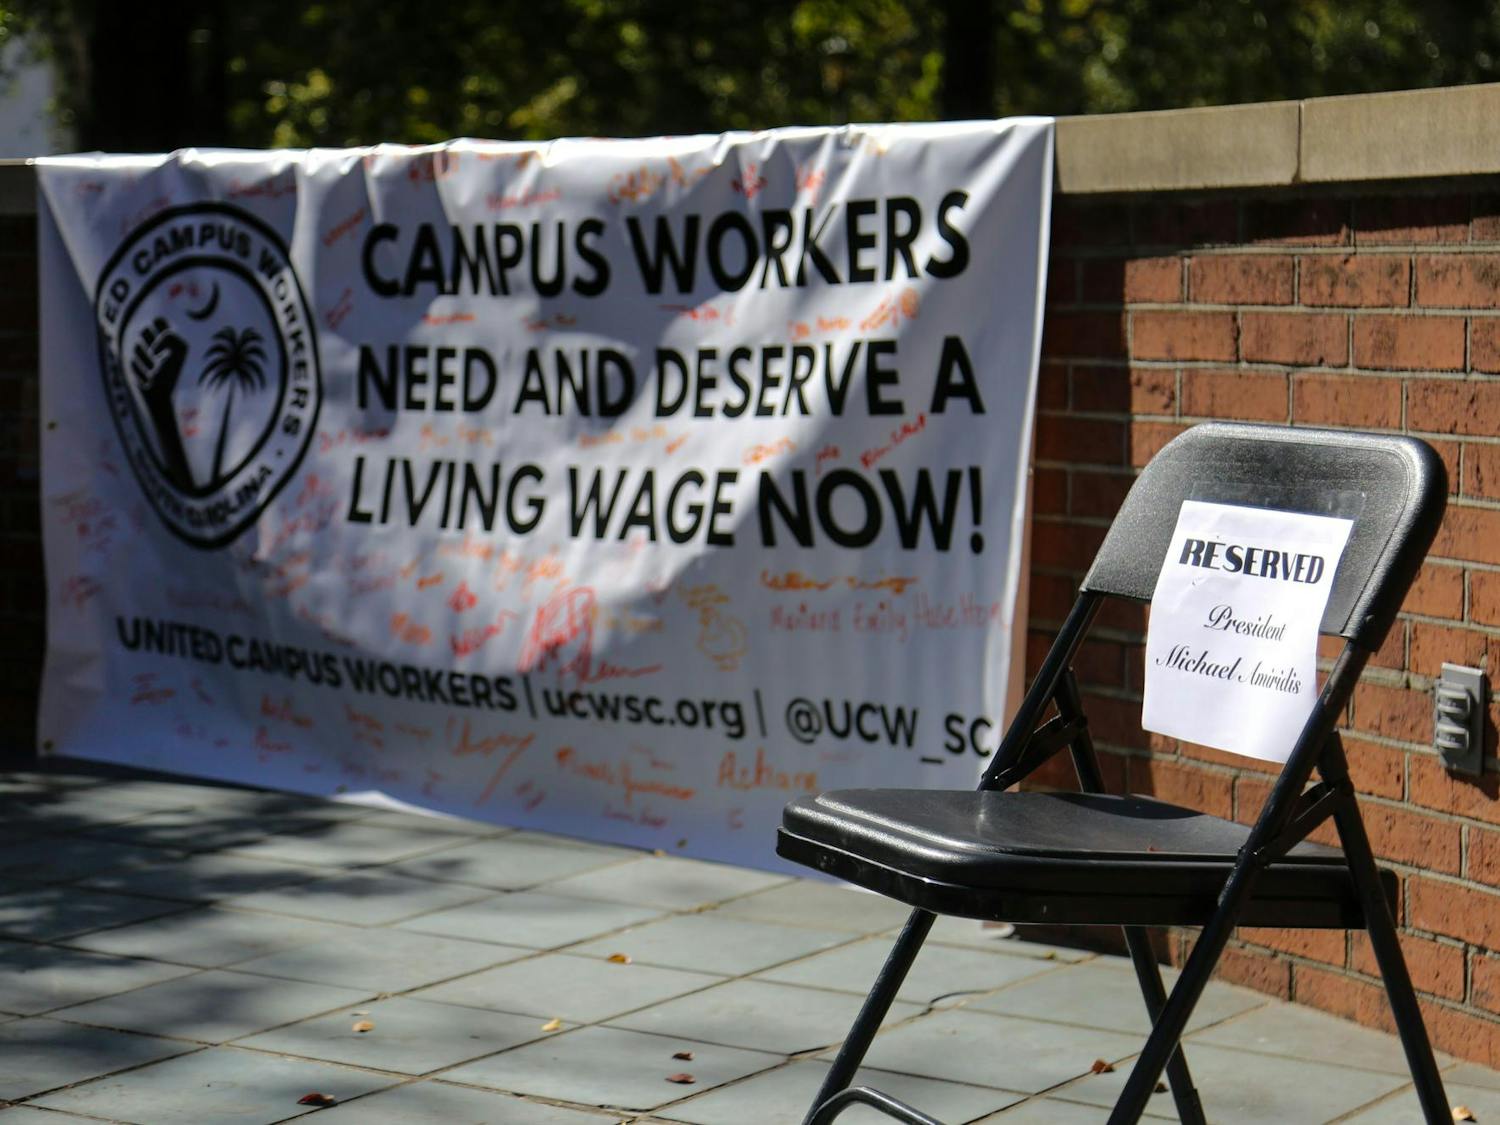 A folding chair reserved for University of South Carolina President Michael Amiridis sits empty on the stage of the Russell House patio during a USC worker speak-out event on Oct. 26, 2023. The event was hosted by United Campus Workers at USC.